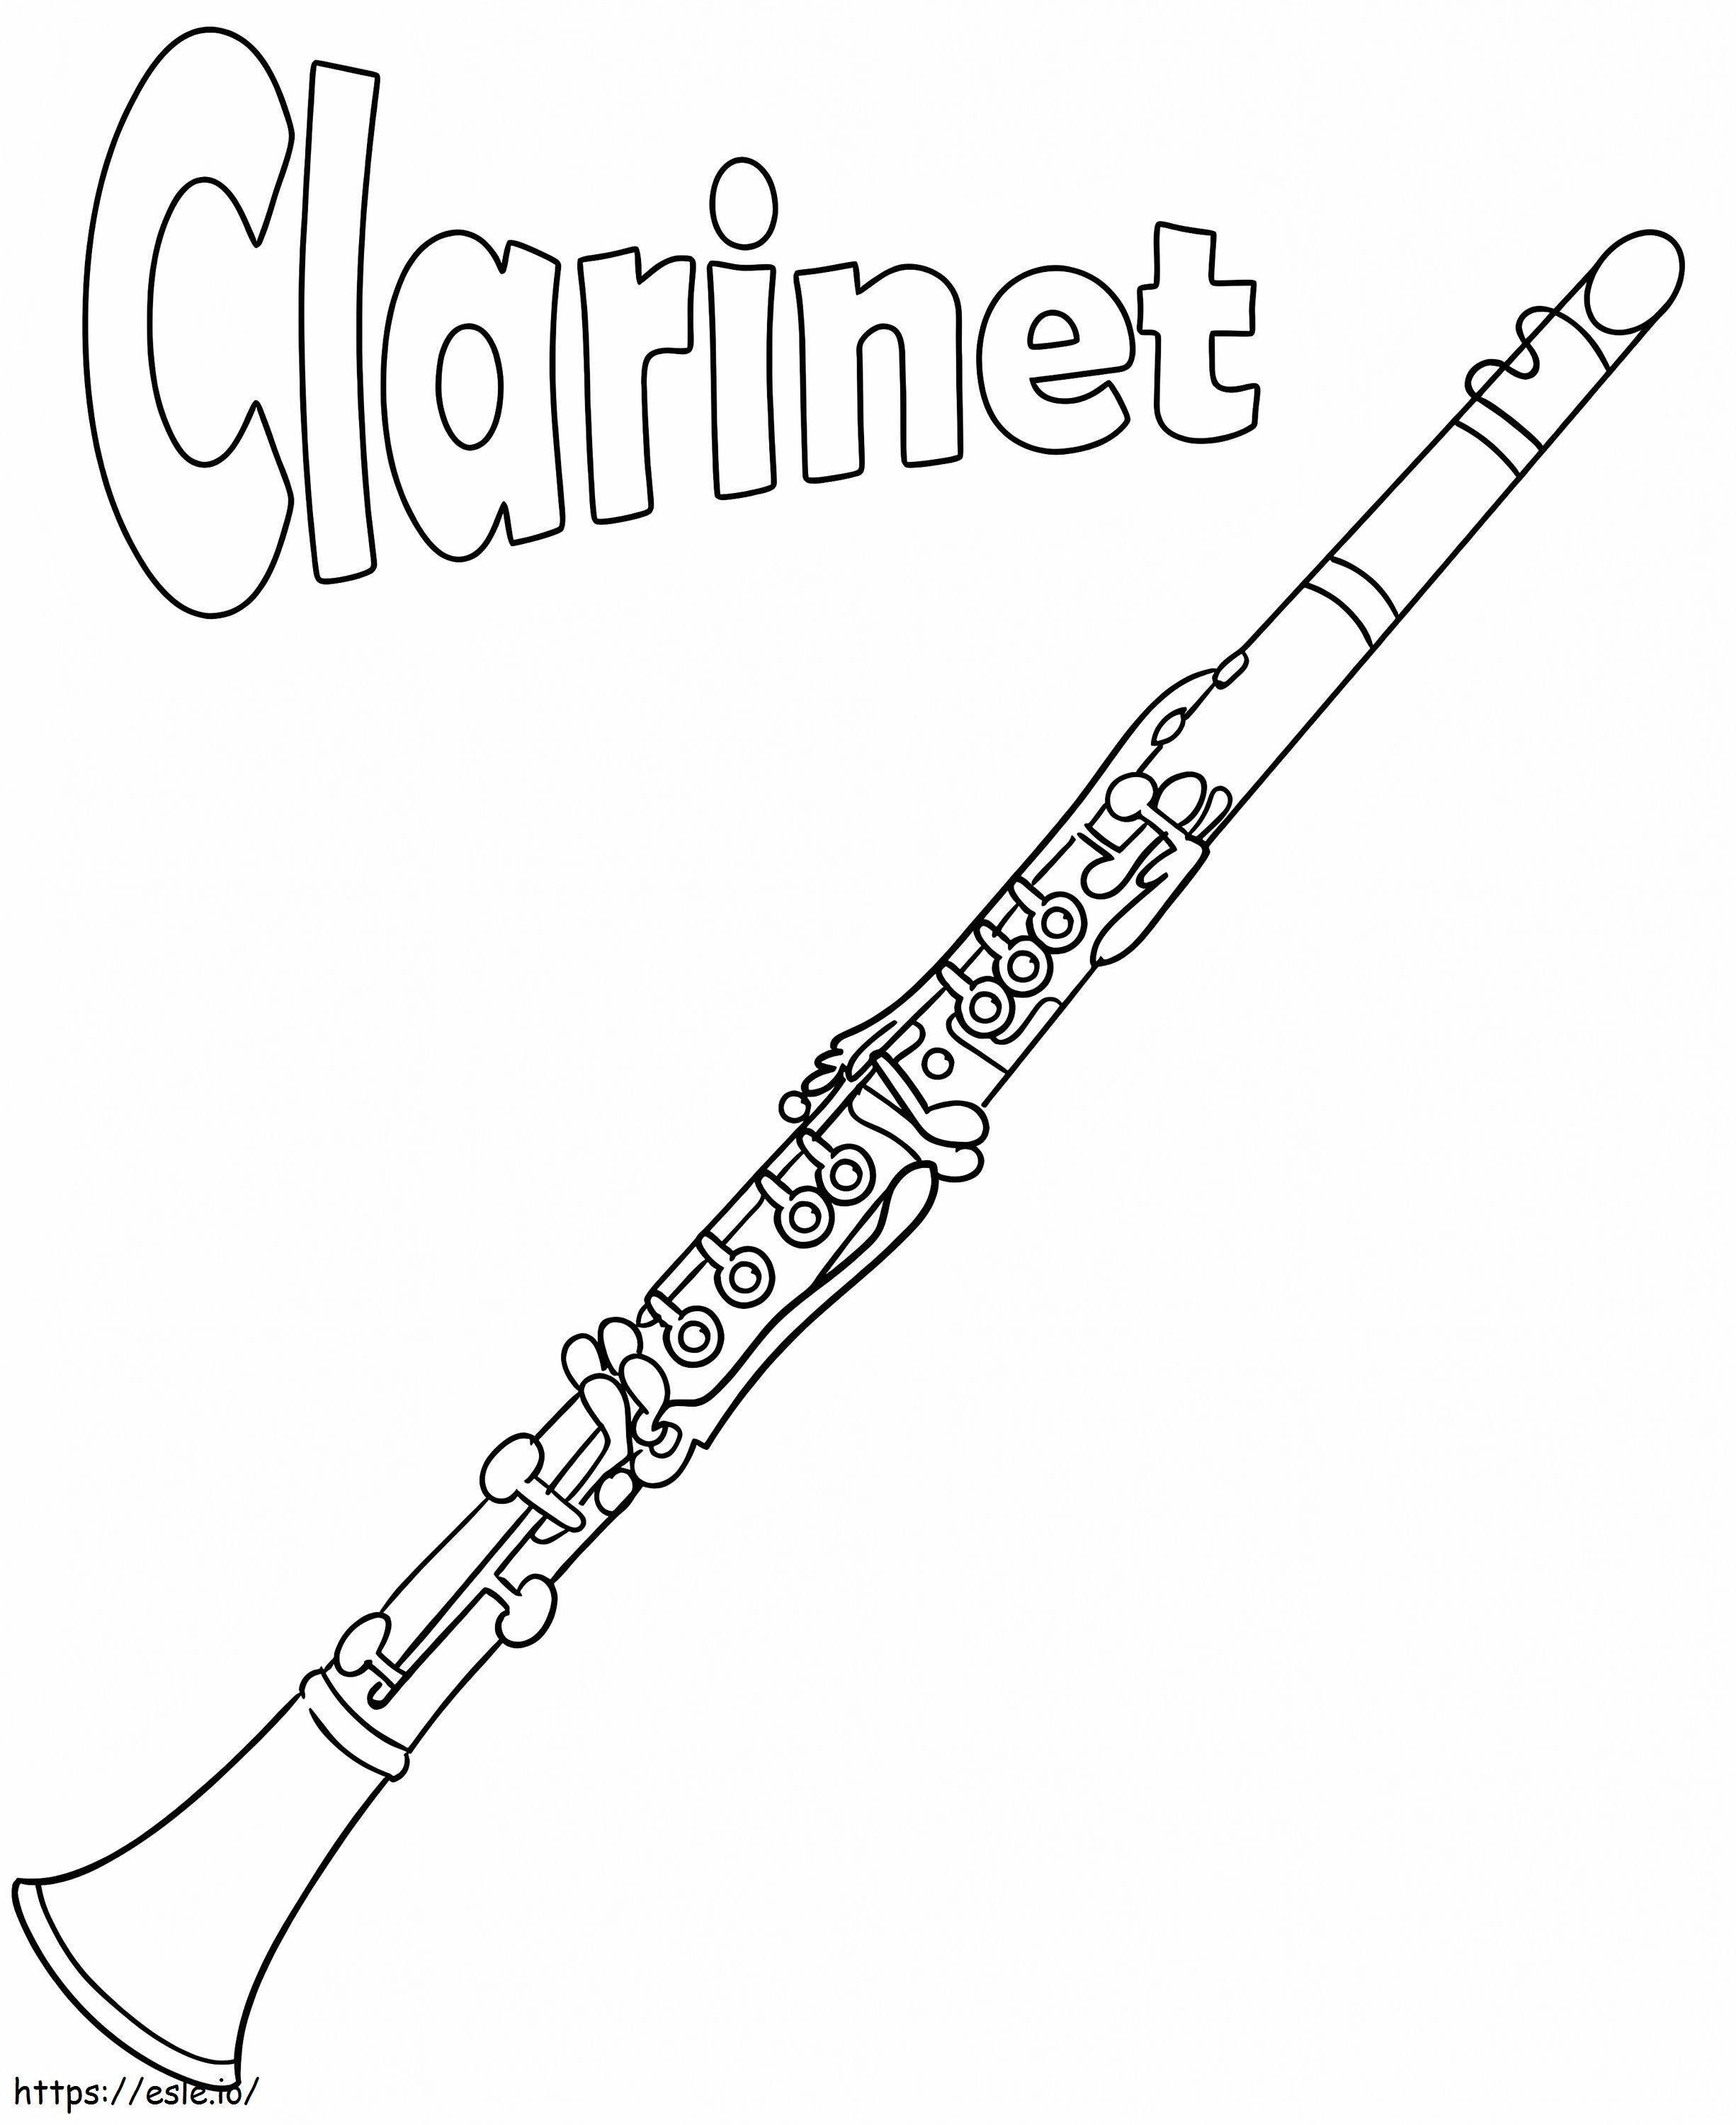 Printable Clarinet coloring page